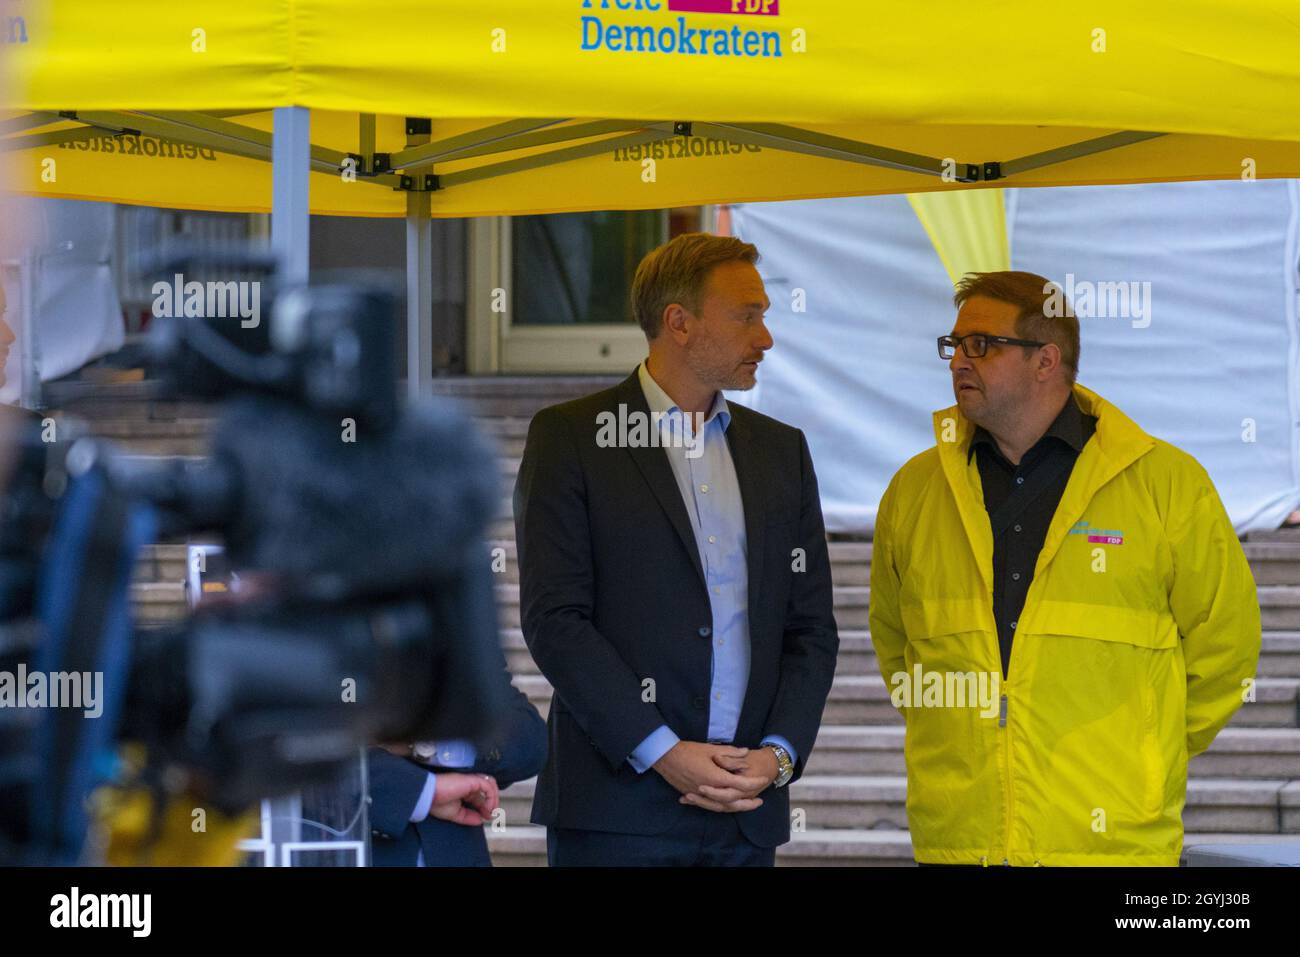 LEIPZIG, GERMANY - Sep 17, 2021: Christian Lindner, top candidate of the 'Free Democratic Party' (FDP) in Germany at a stand at an election campaign e Stock Photo